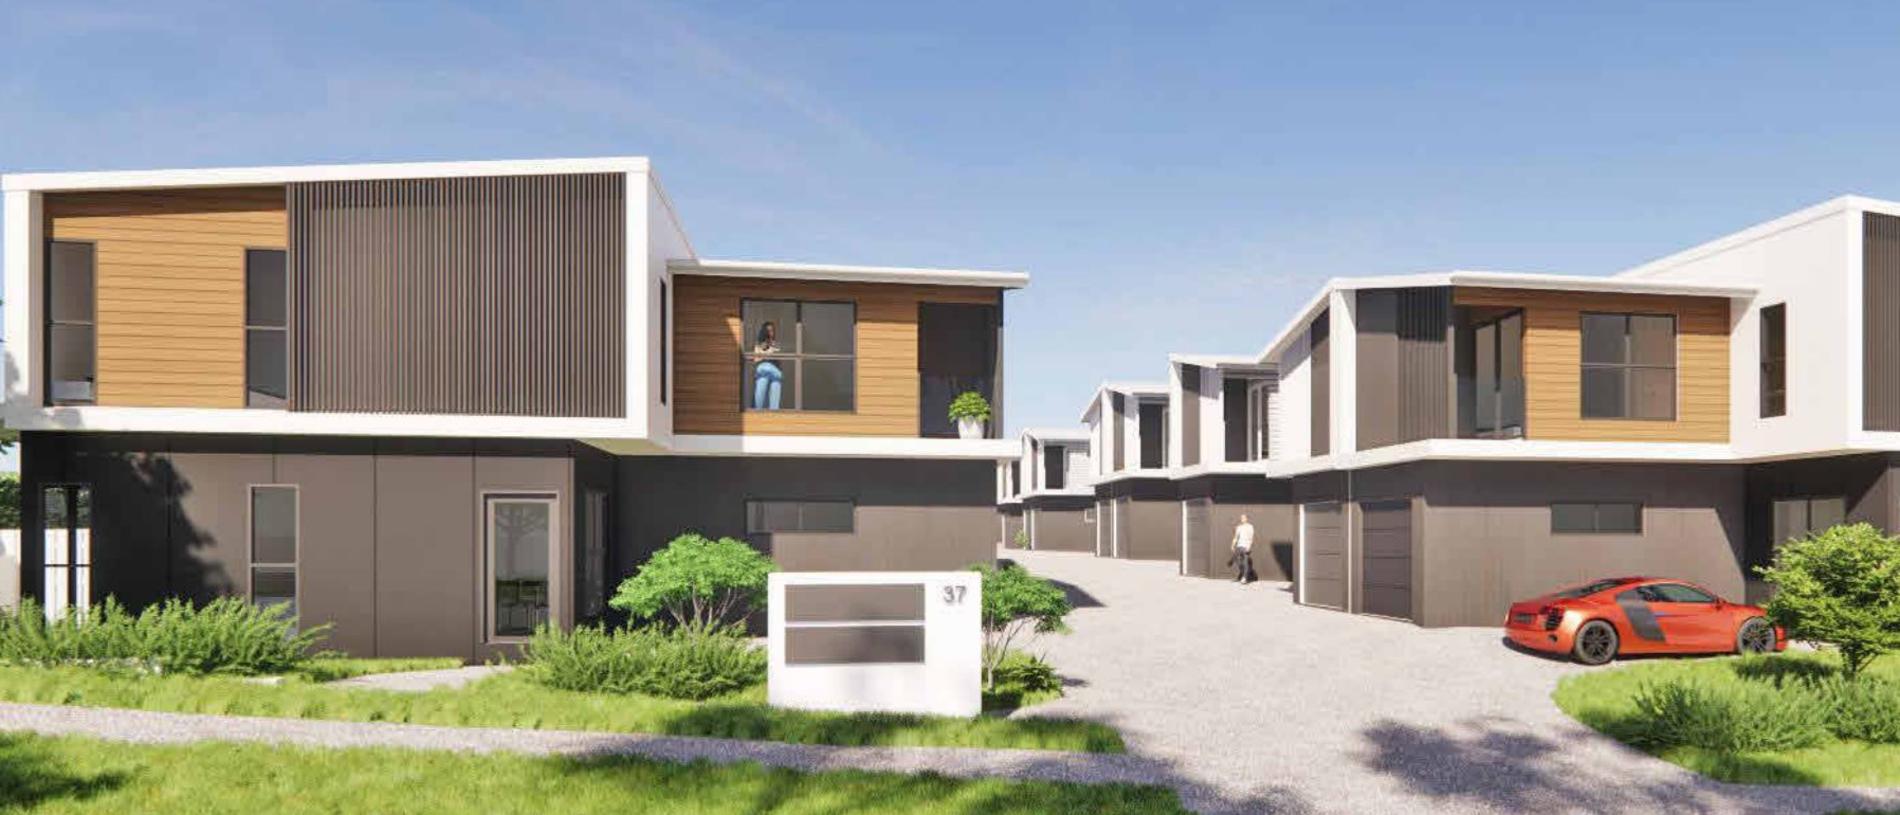 A set of 20 three-bedroom units has been proposed for Glennie Street in Drayton.